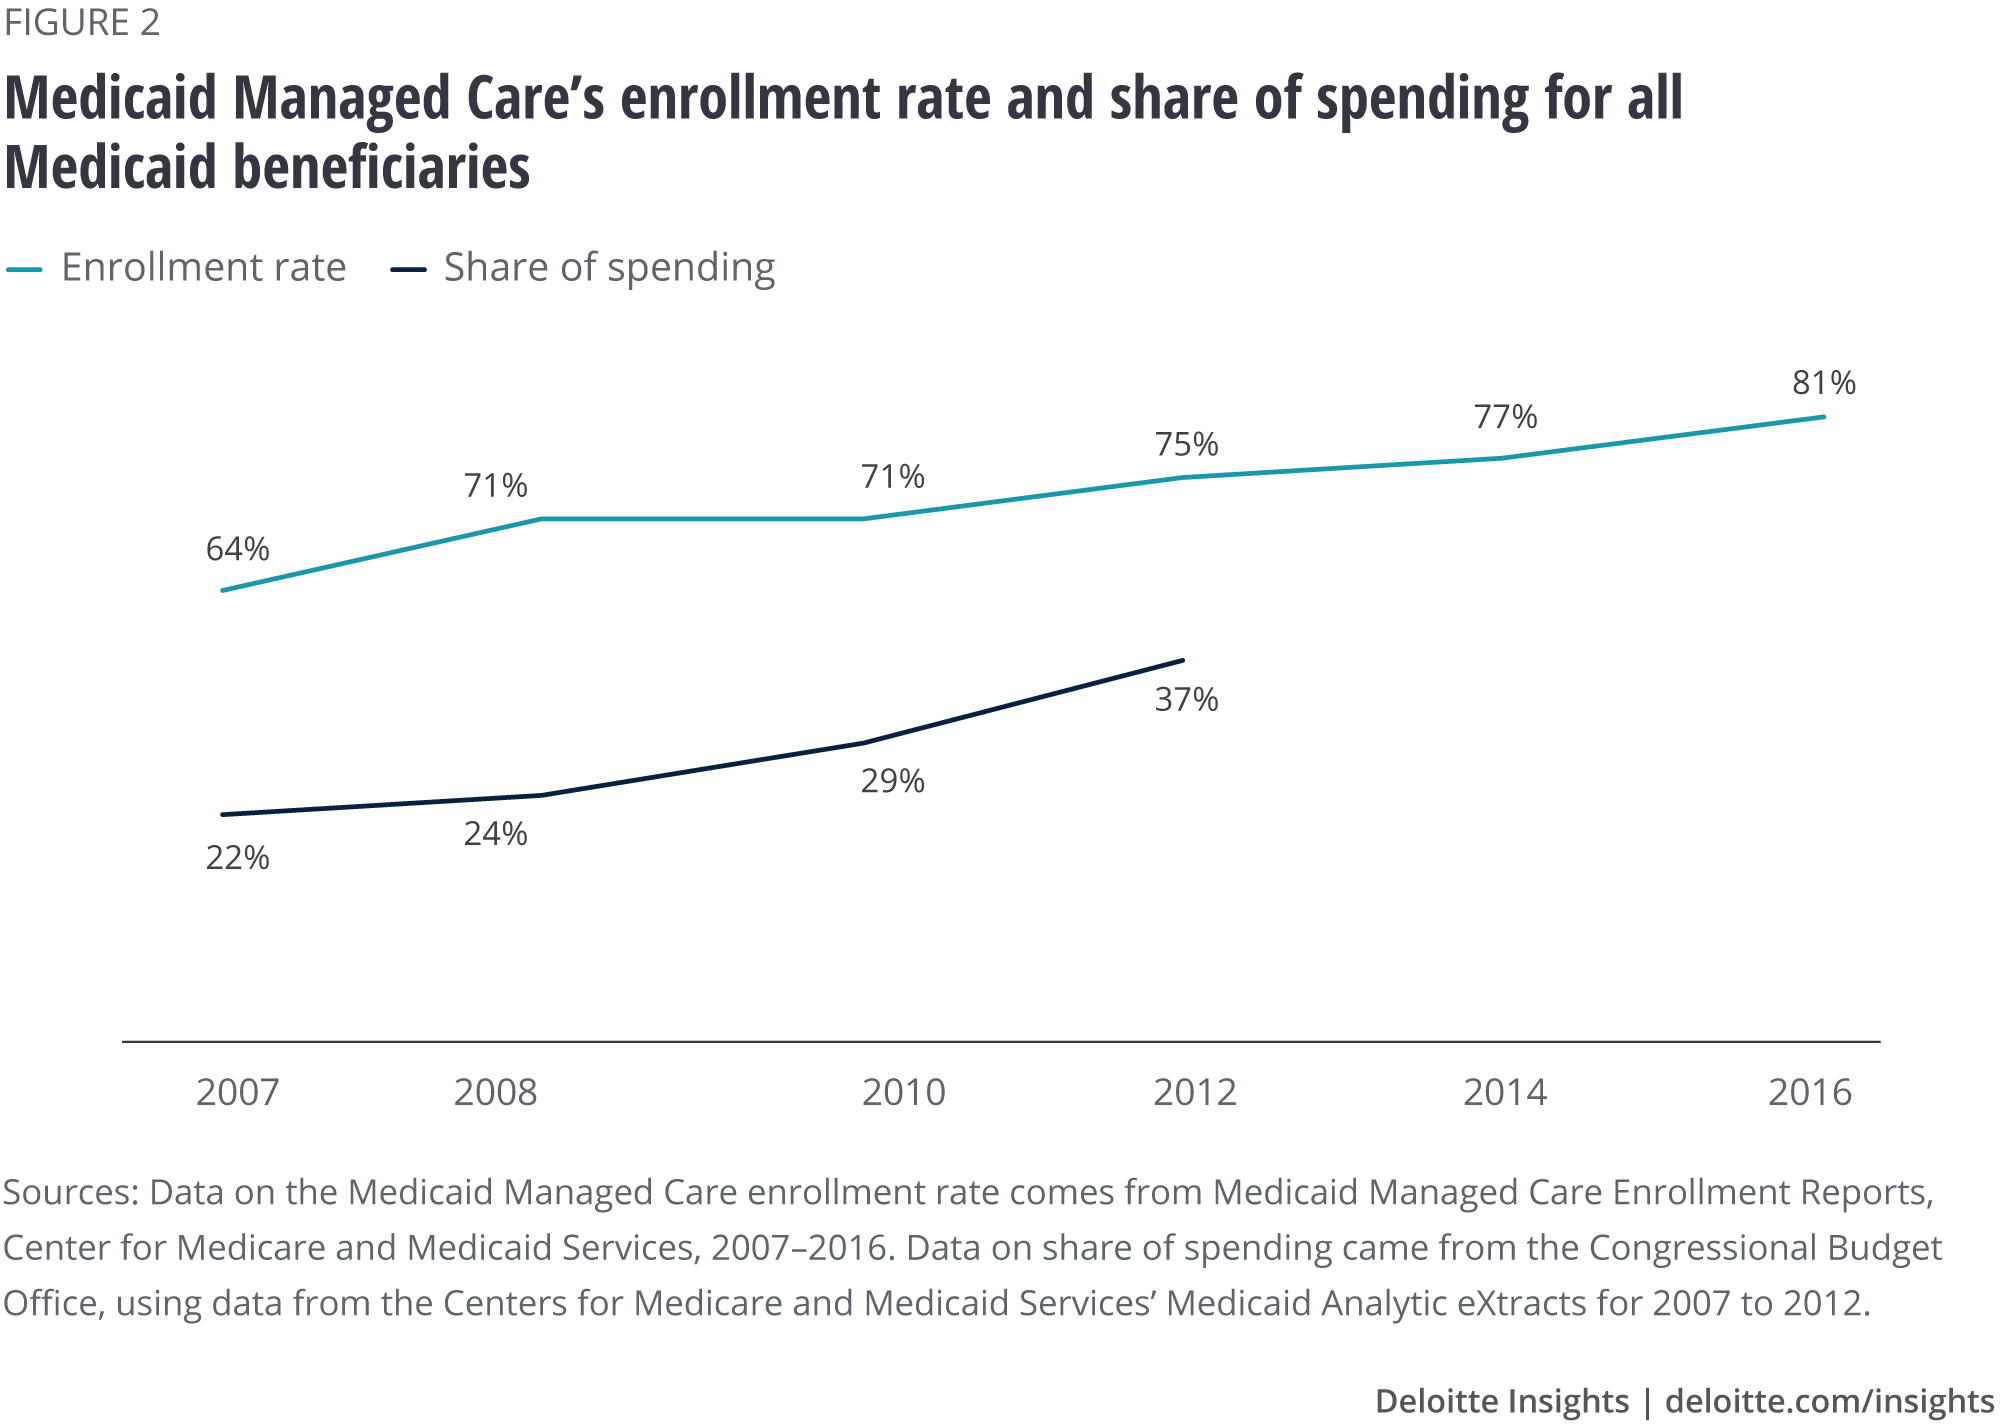 Medicaid Managed Care’s enrollment rate and share of spending for all Medicaid beneficiaries